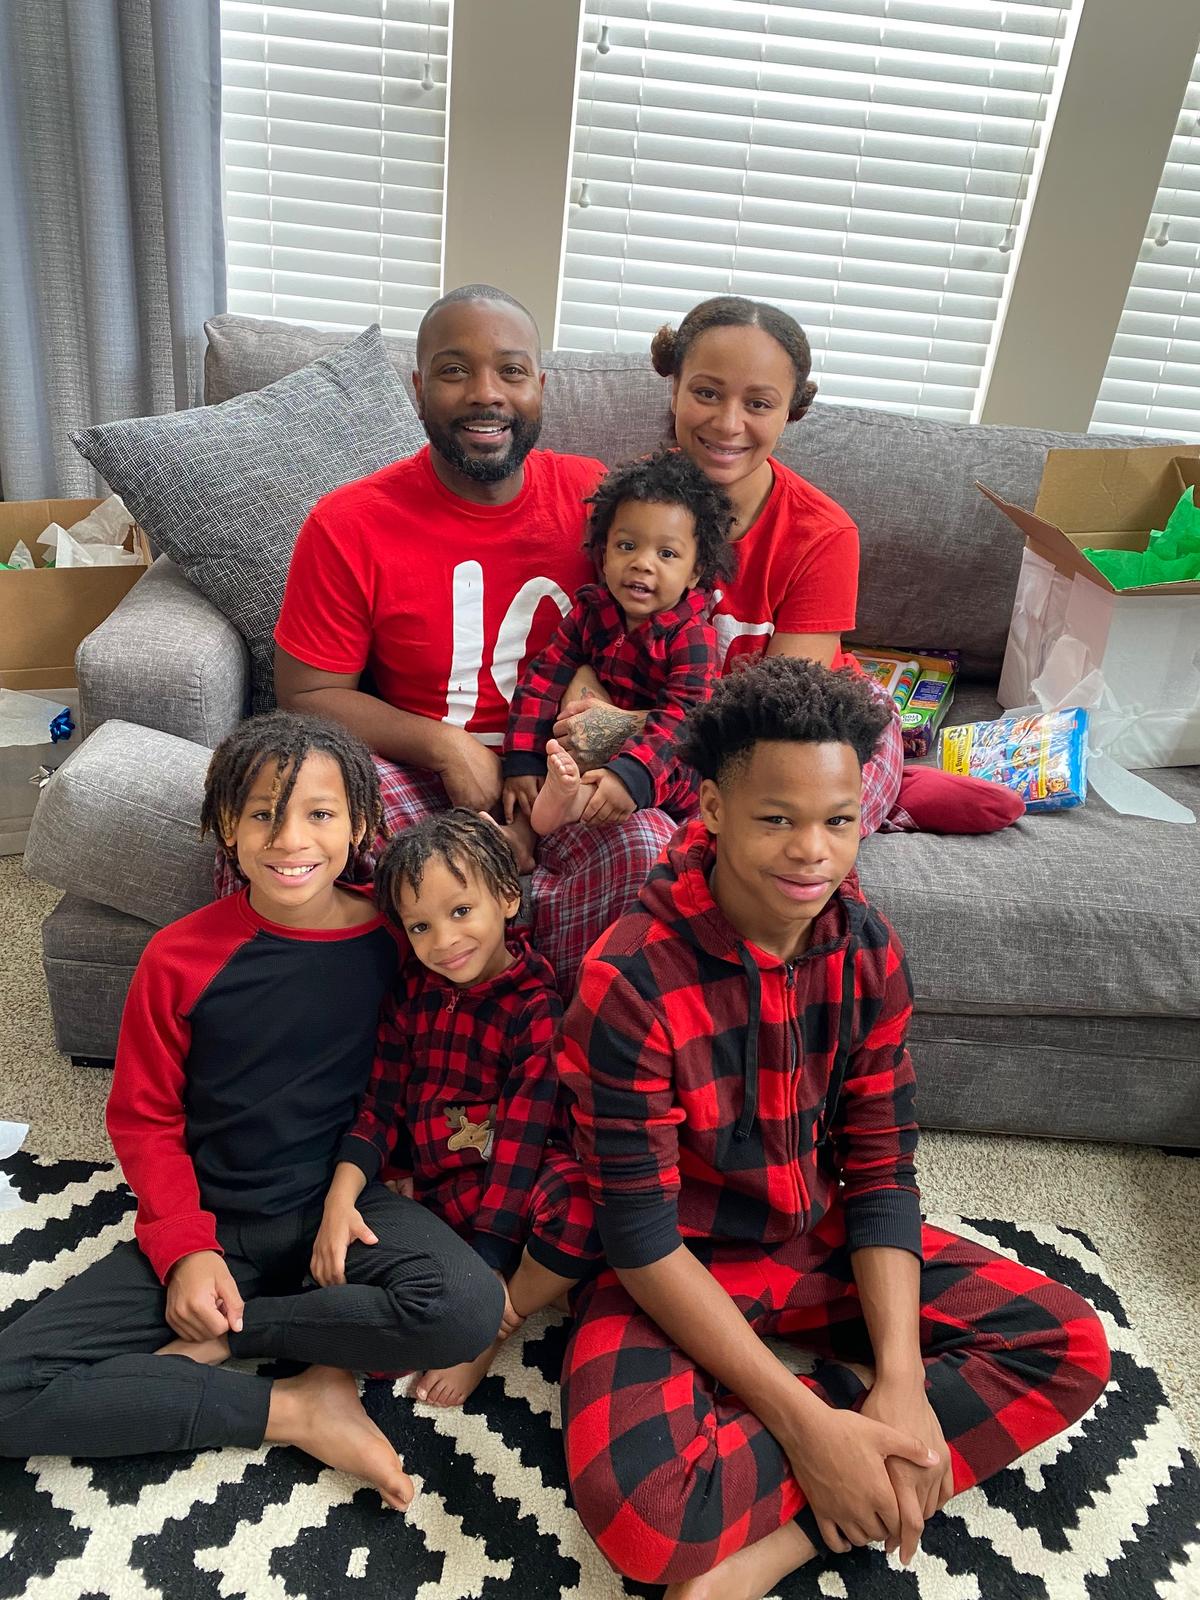 Gloria and her husband Derric McIntosh and their kids. (Courtesy of <a href="https://www.instagram.com/Gloriaugly/">Gloria McIntosh</a>)